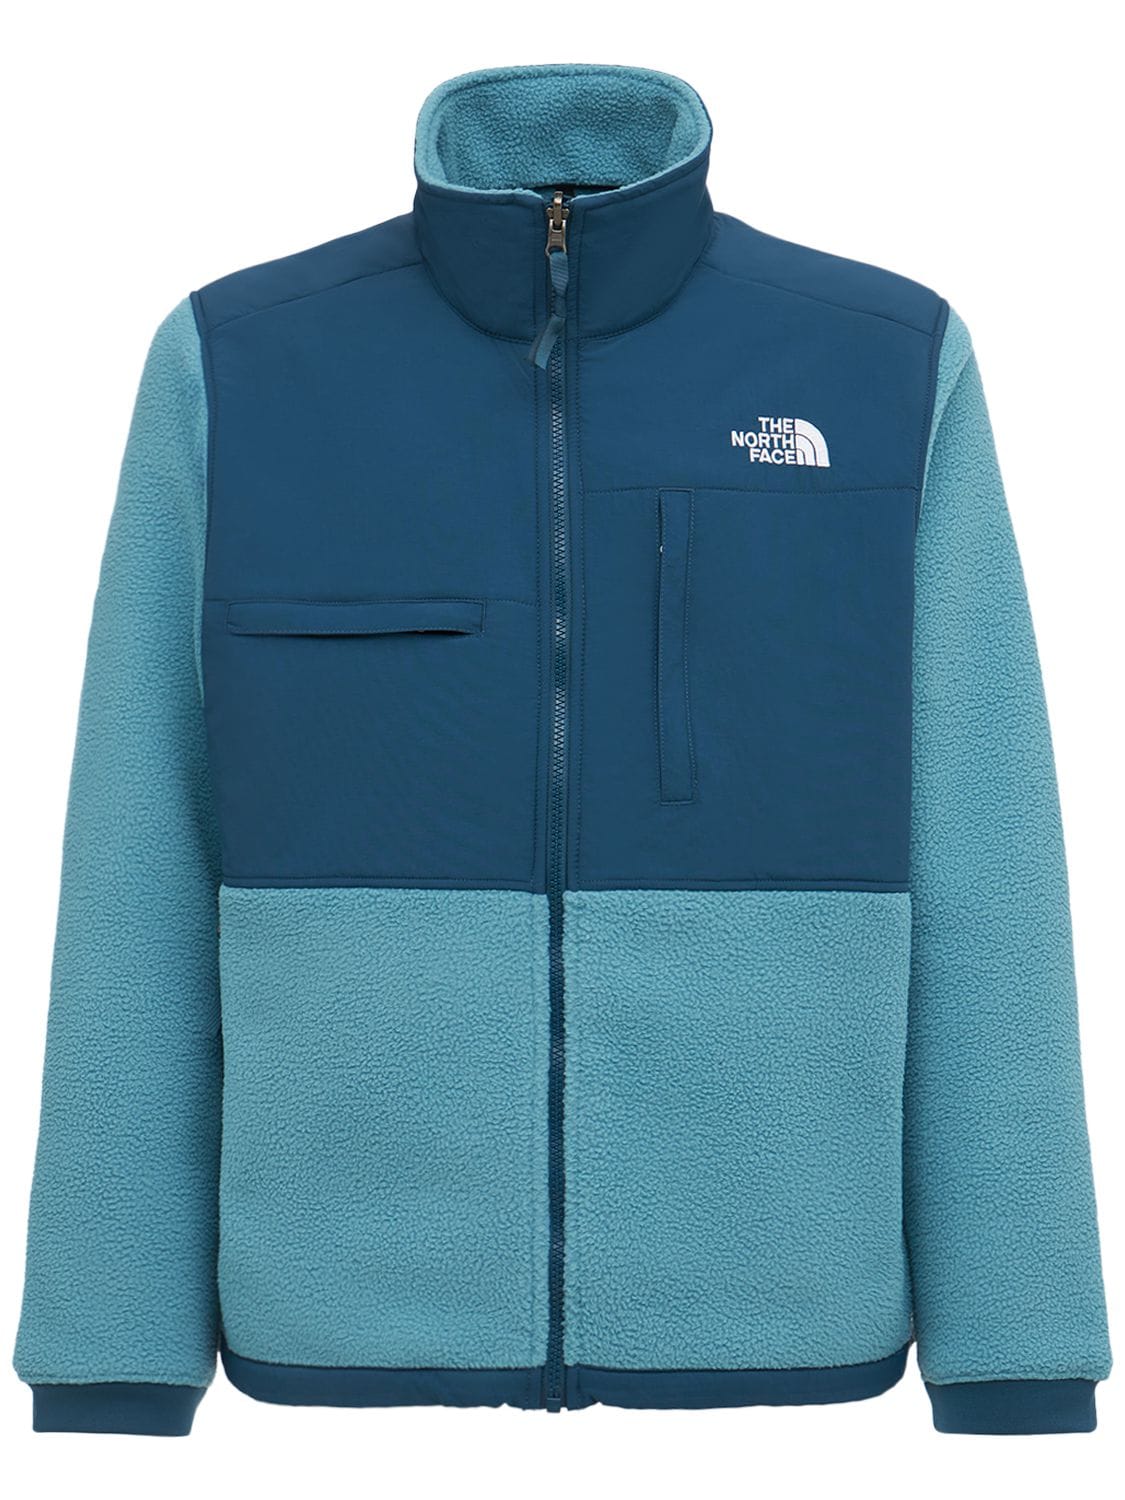 The North Face Denali 2 Jacket In Storm Blue